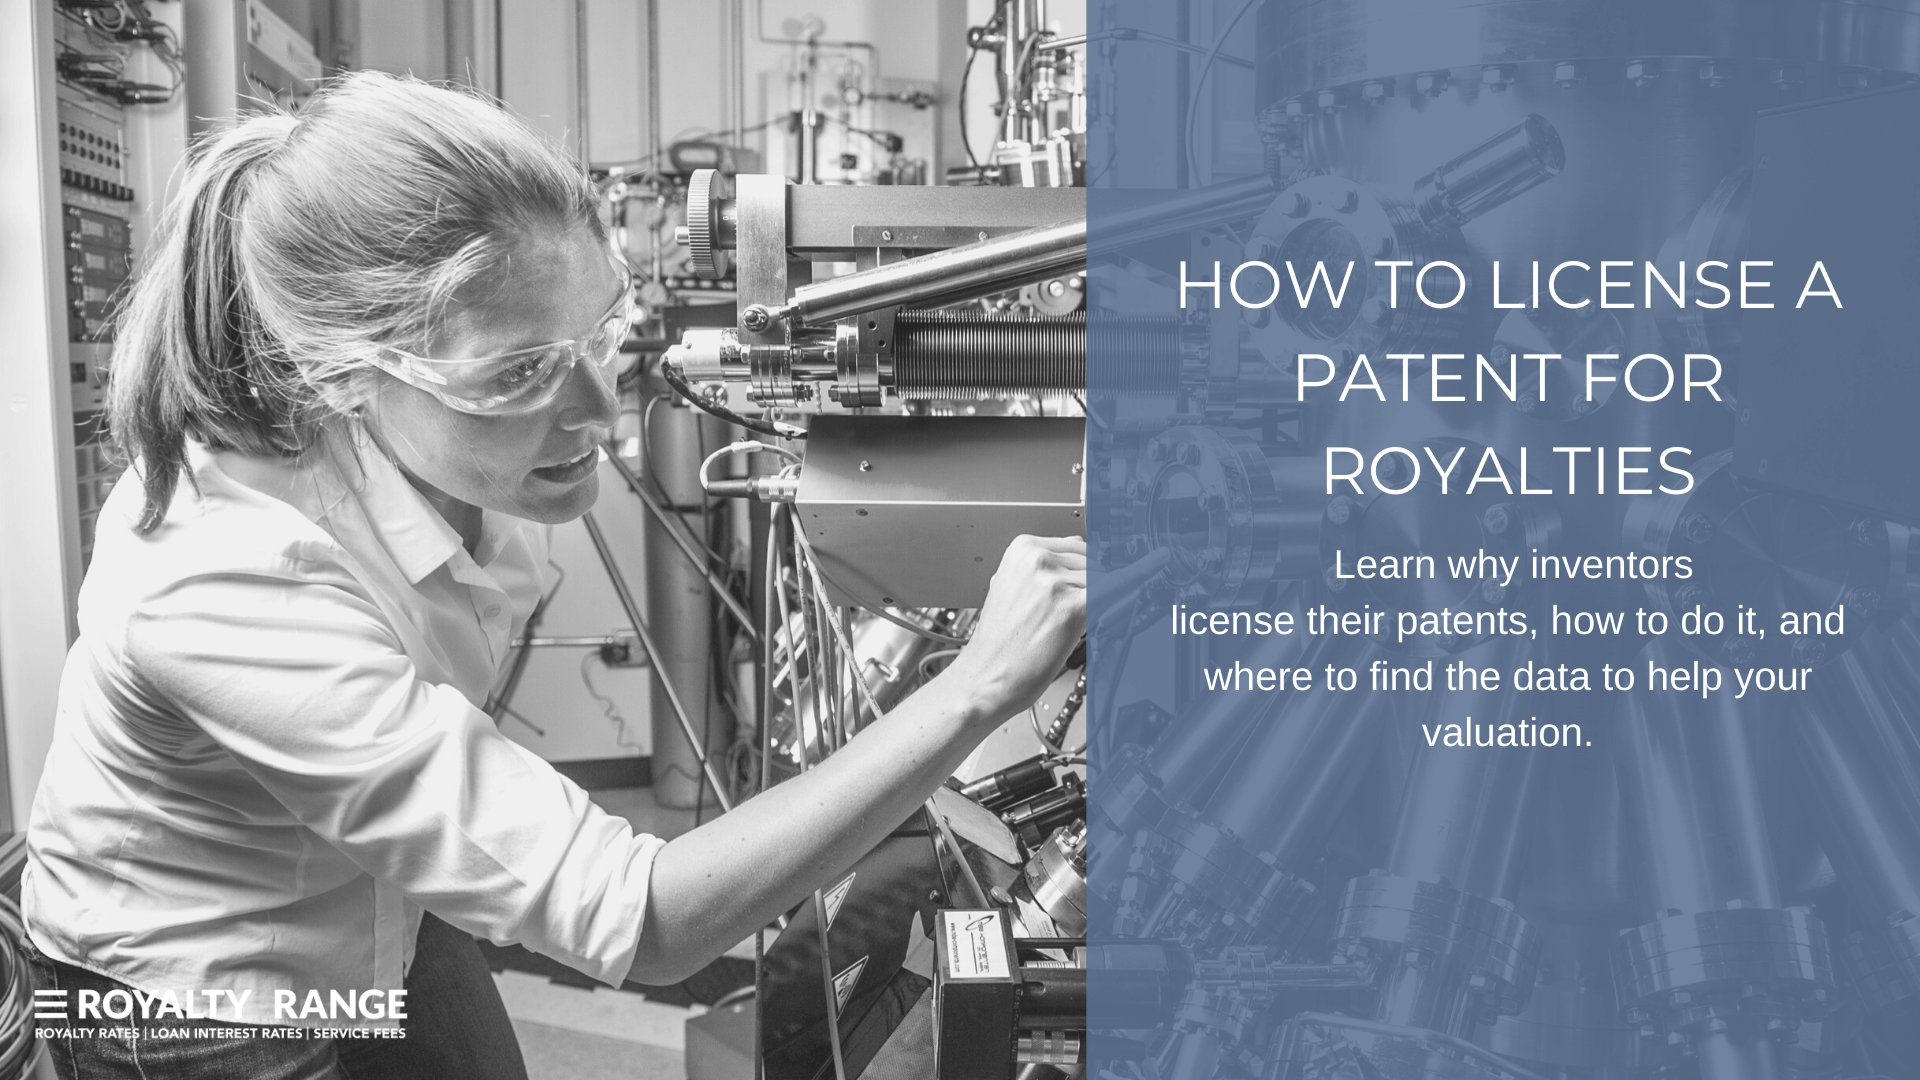 How to license a patent for royalties